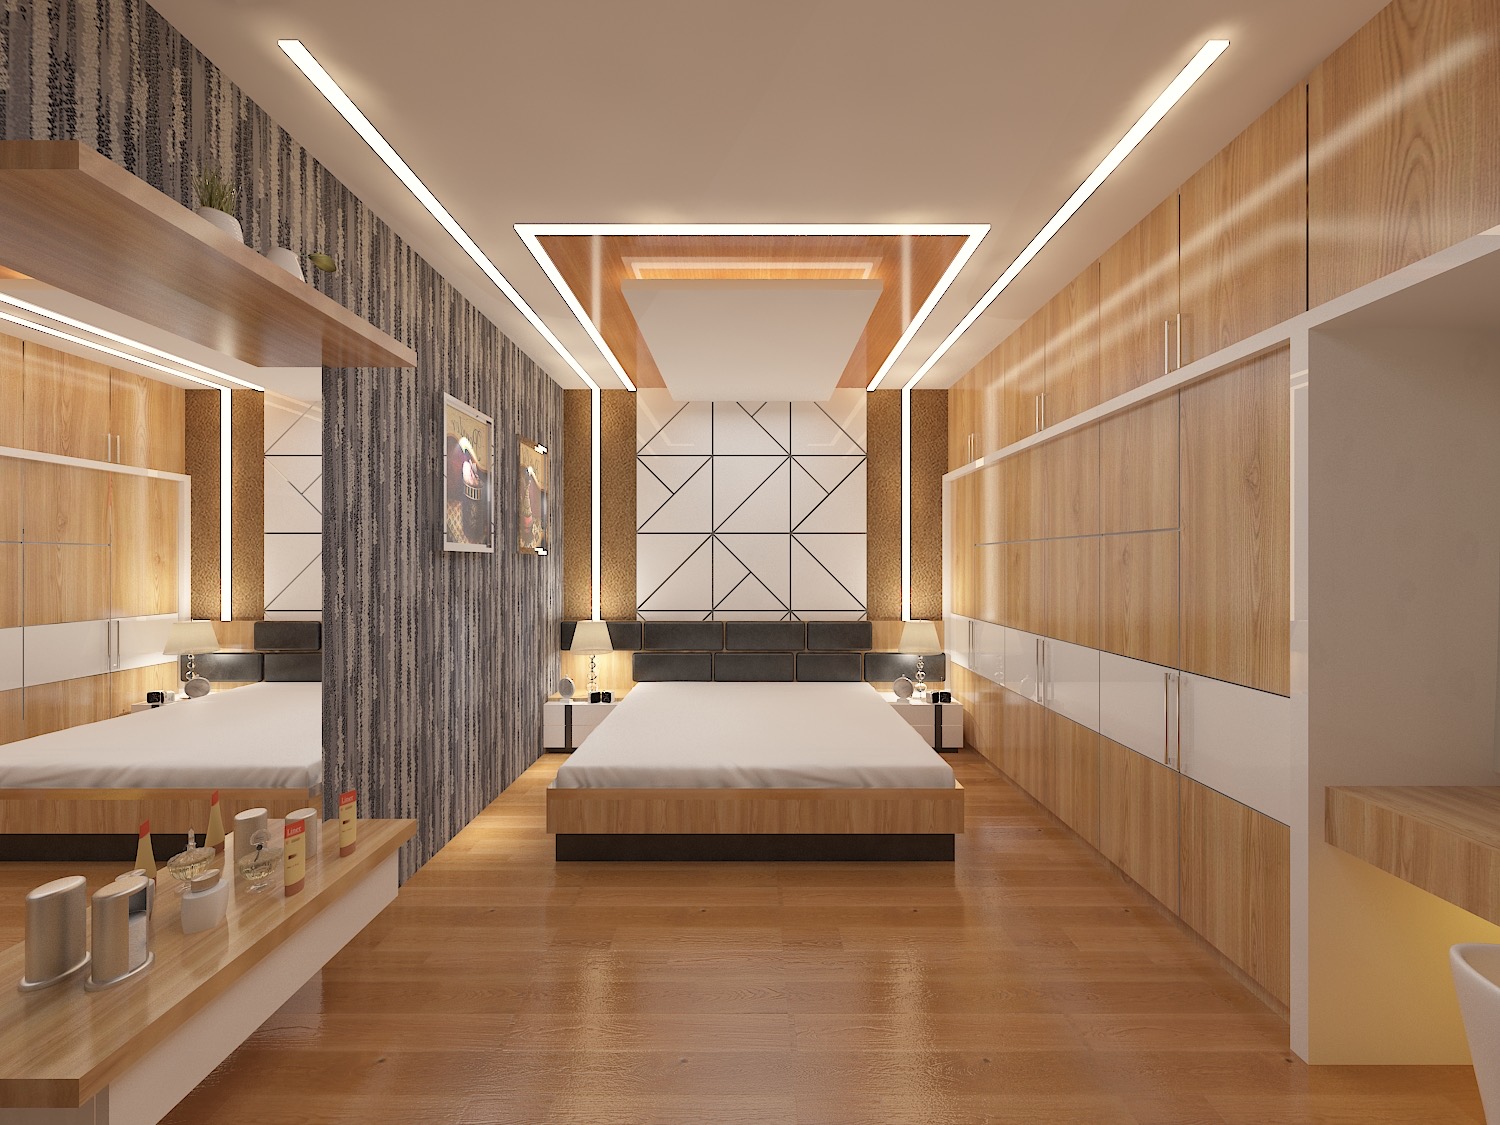 Bedroom Design With Ceiling